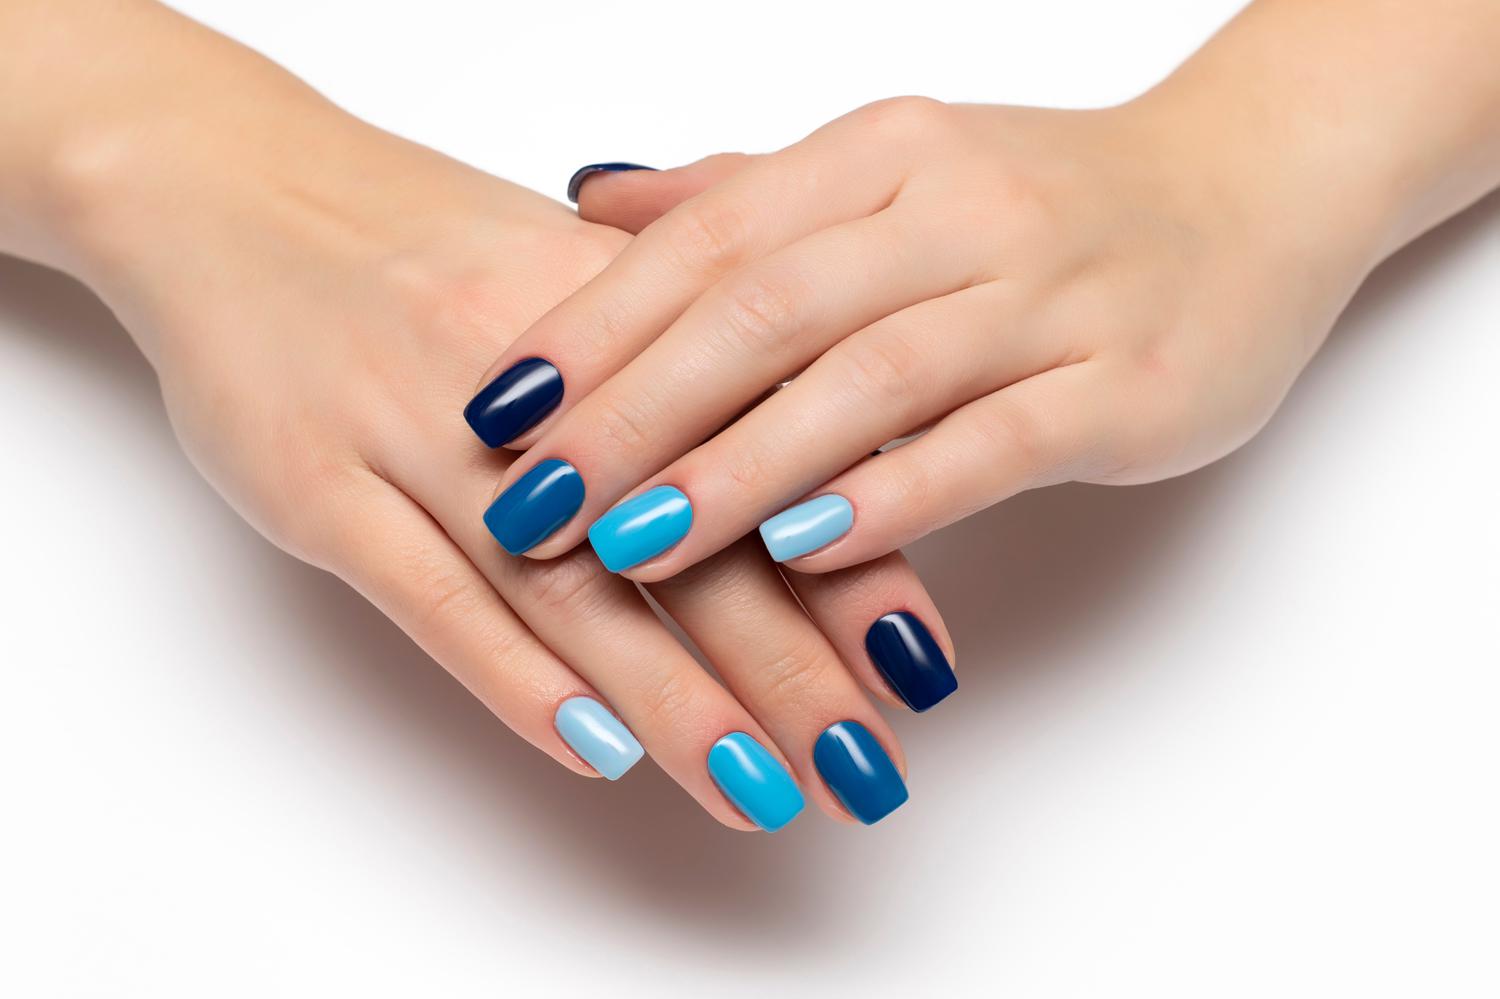 You can decorate each nail in a different shade of blue.  This way you can use the whole palette at once